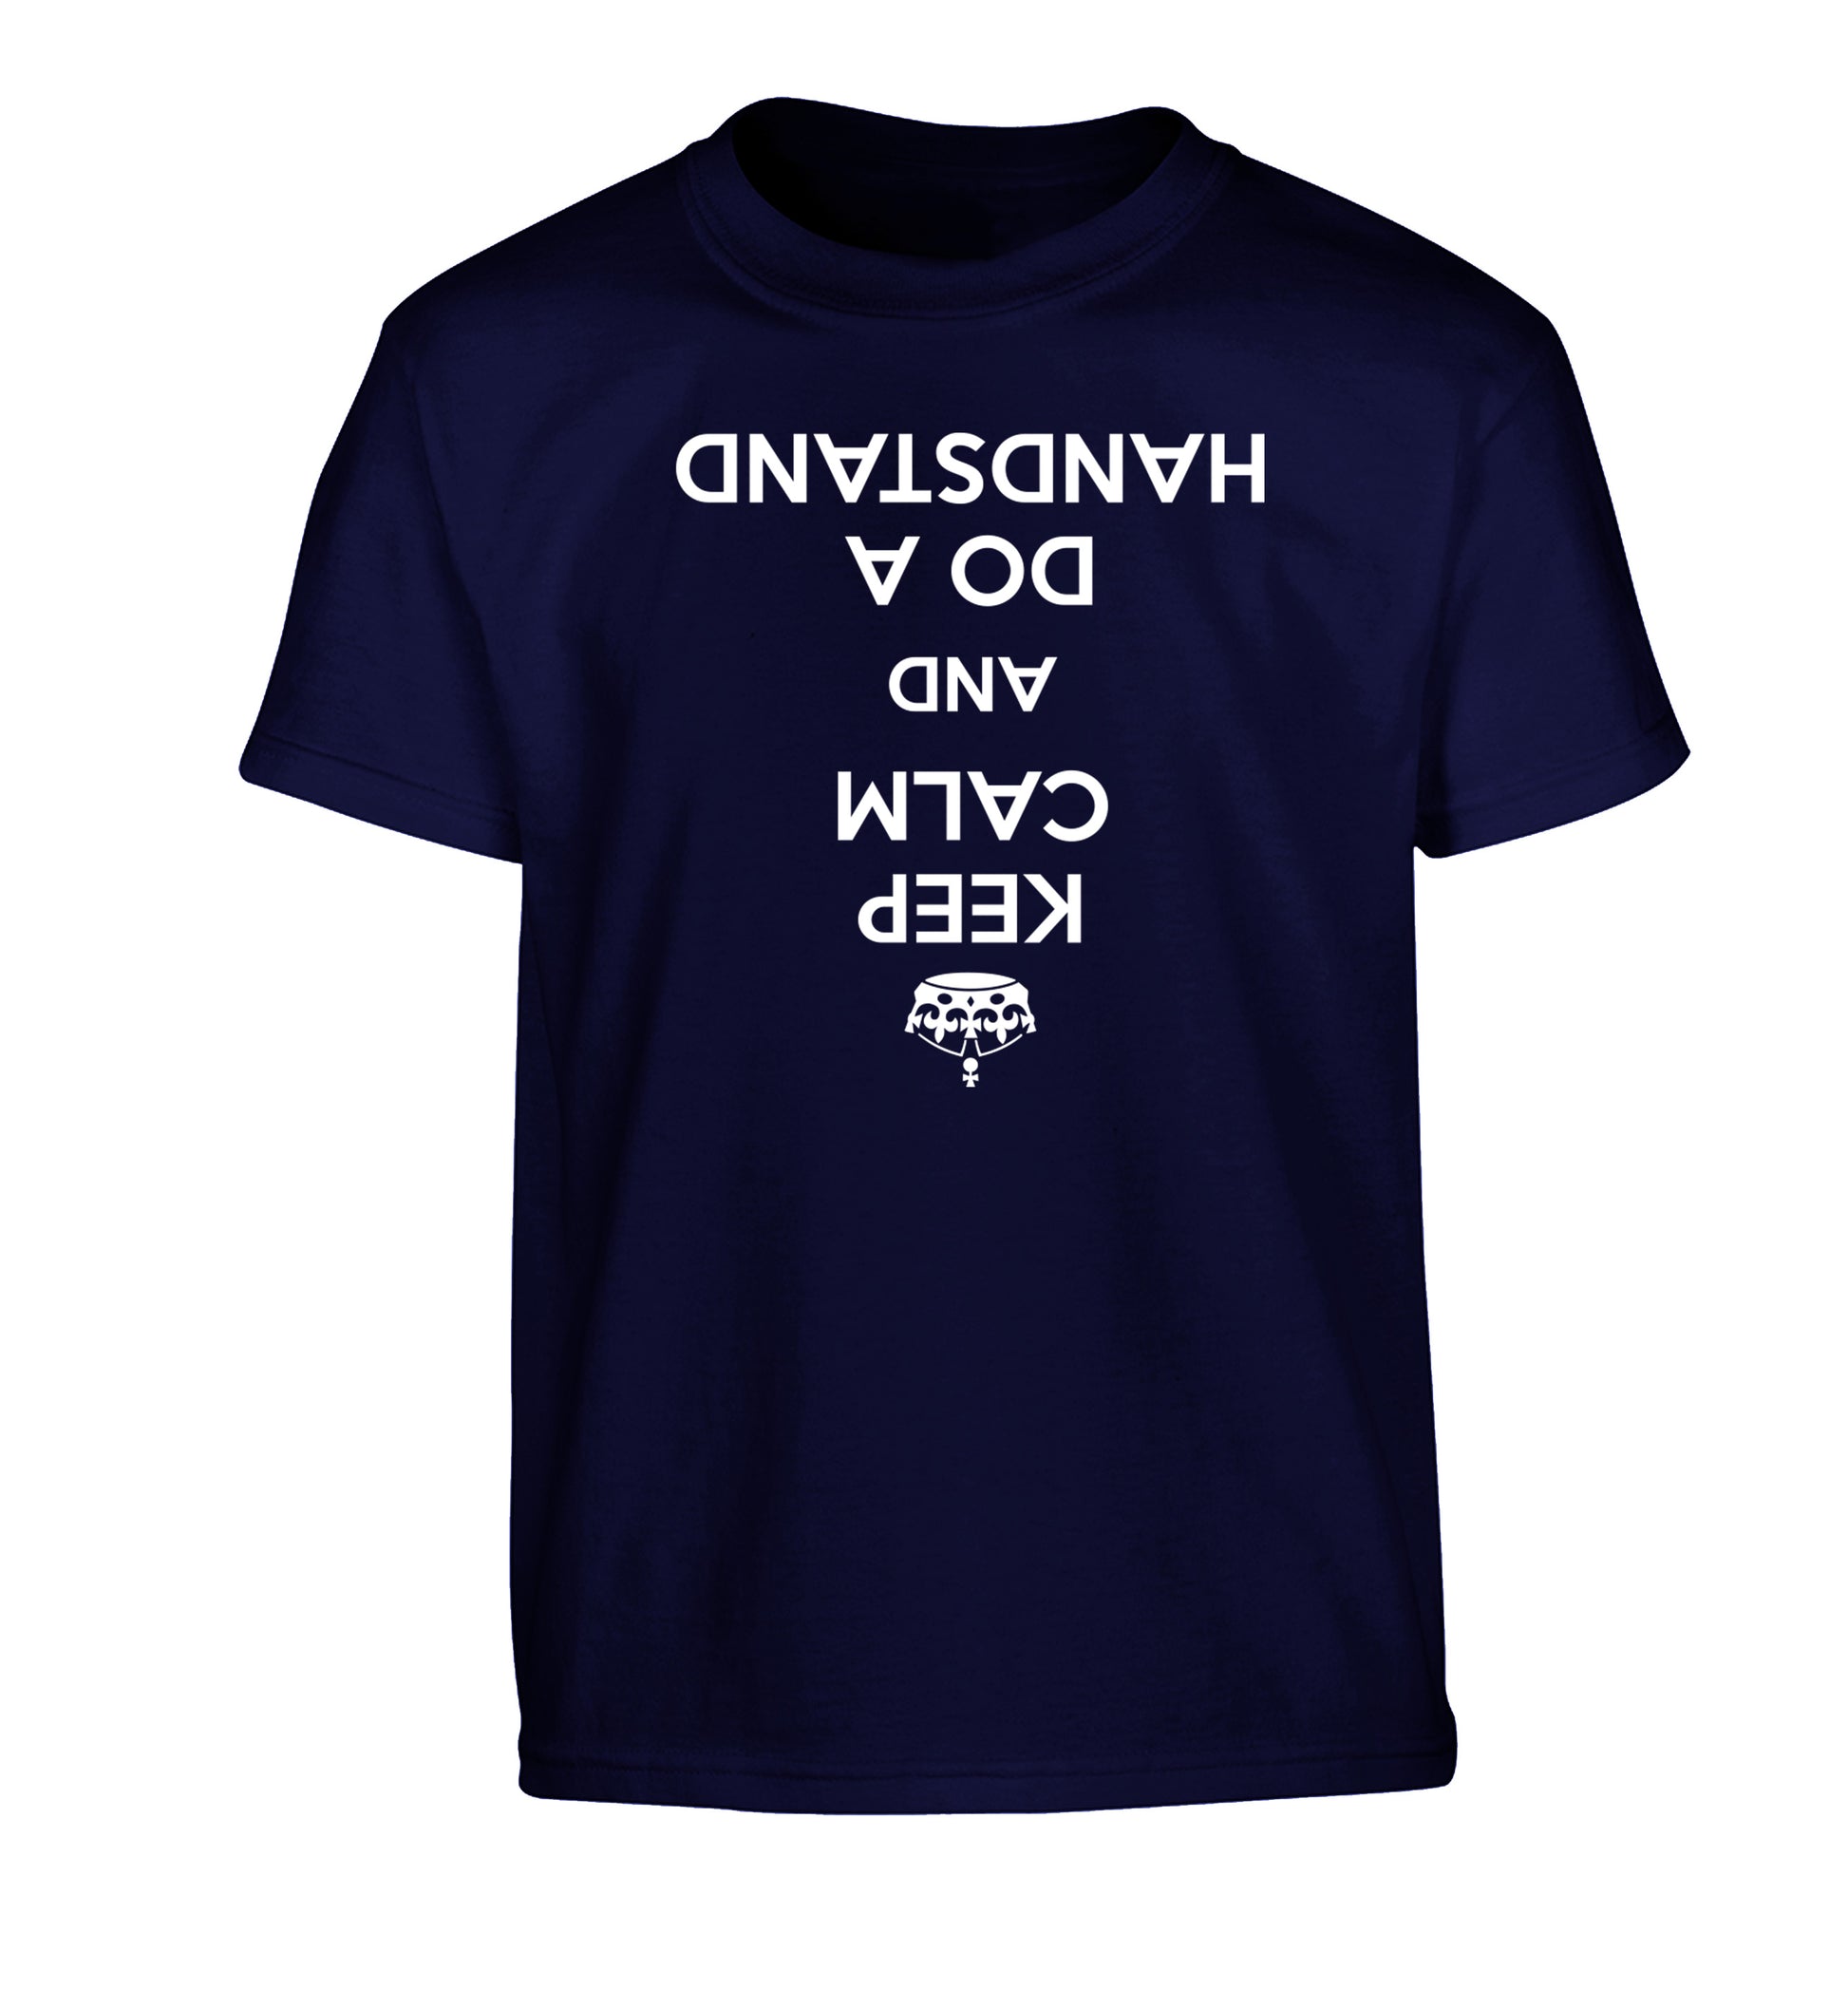 Keep calm and do a handstand Children's navy Tshirt 12-13 Years